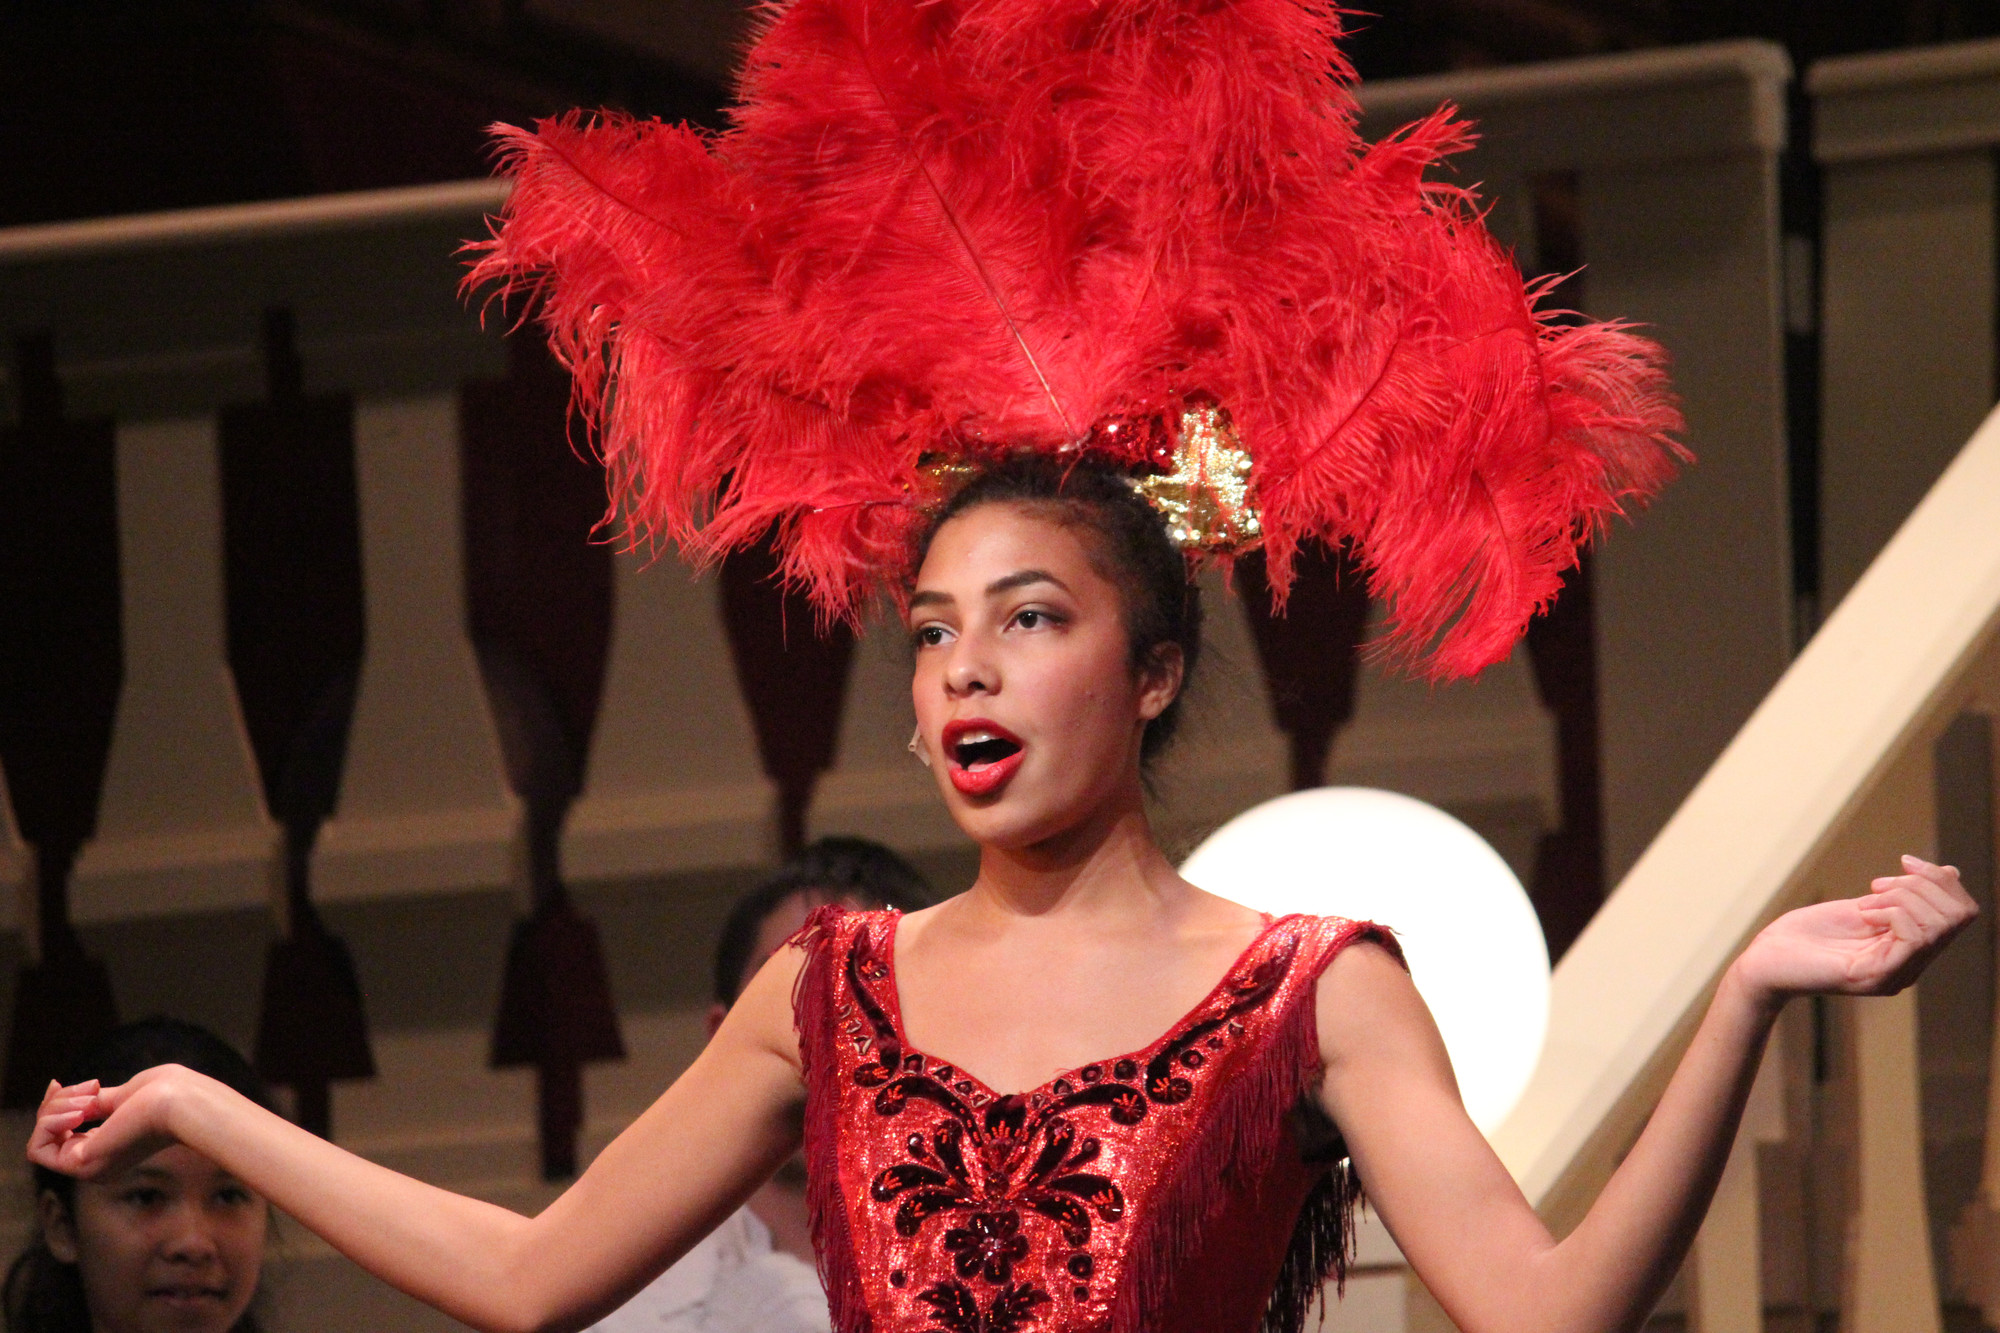 Senior Ashley Mayers played the starring role in Baldwin High School’s production of Hello, Dolly! last weekend.